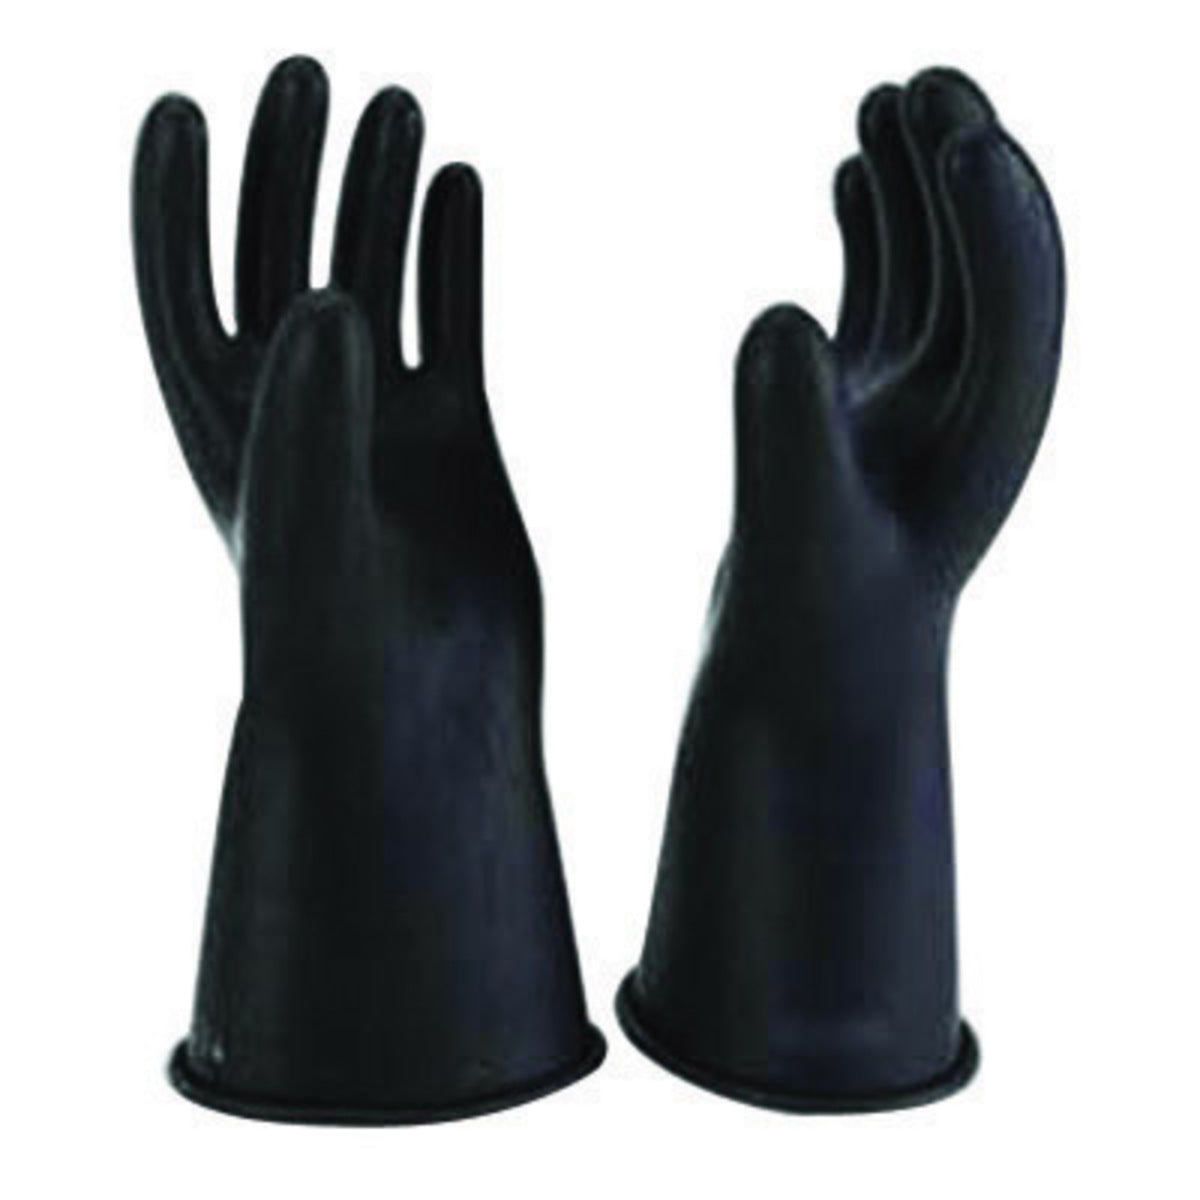 Salisbury by Honeywell Size 10 Black Rubber Class 1 Linesmens Gloves